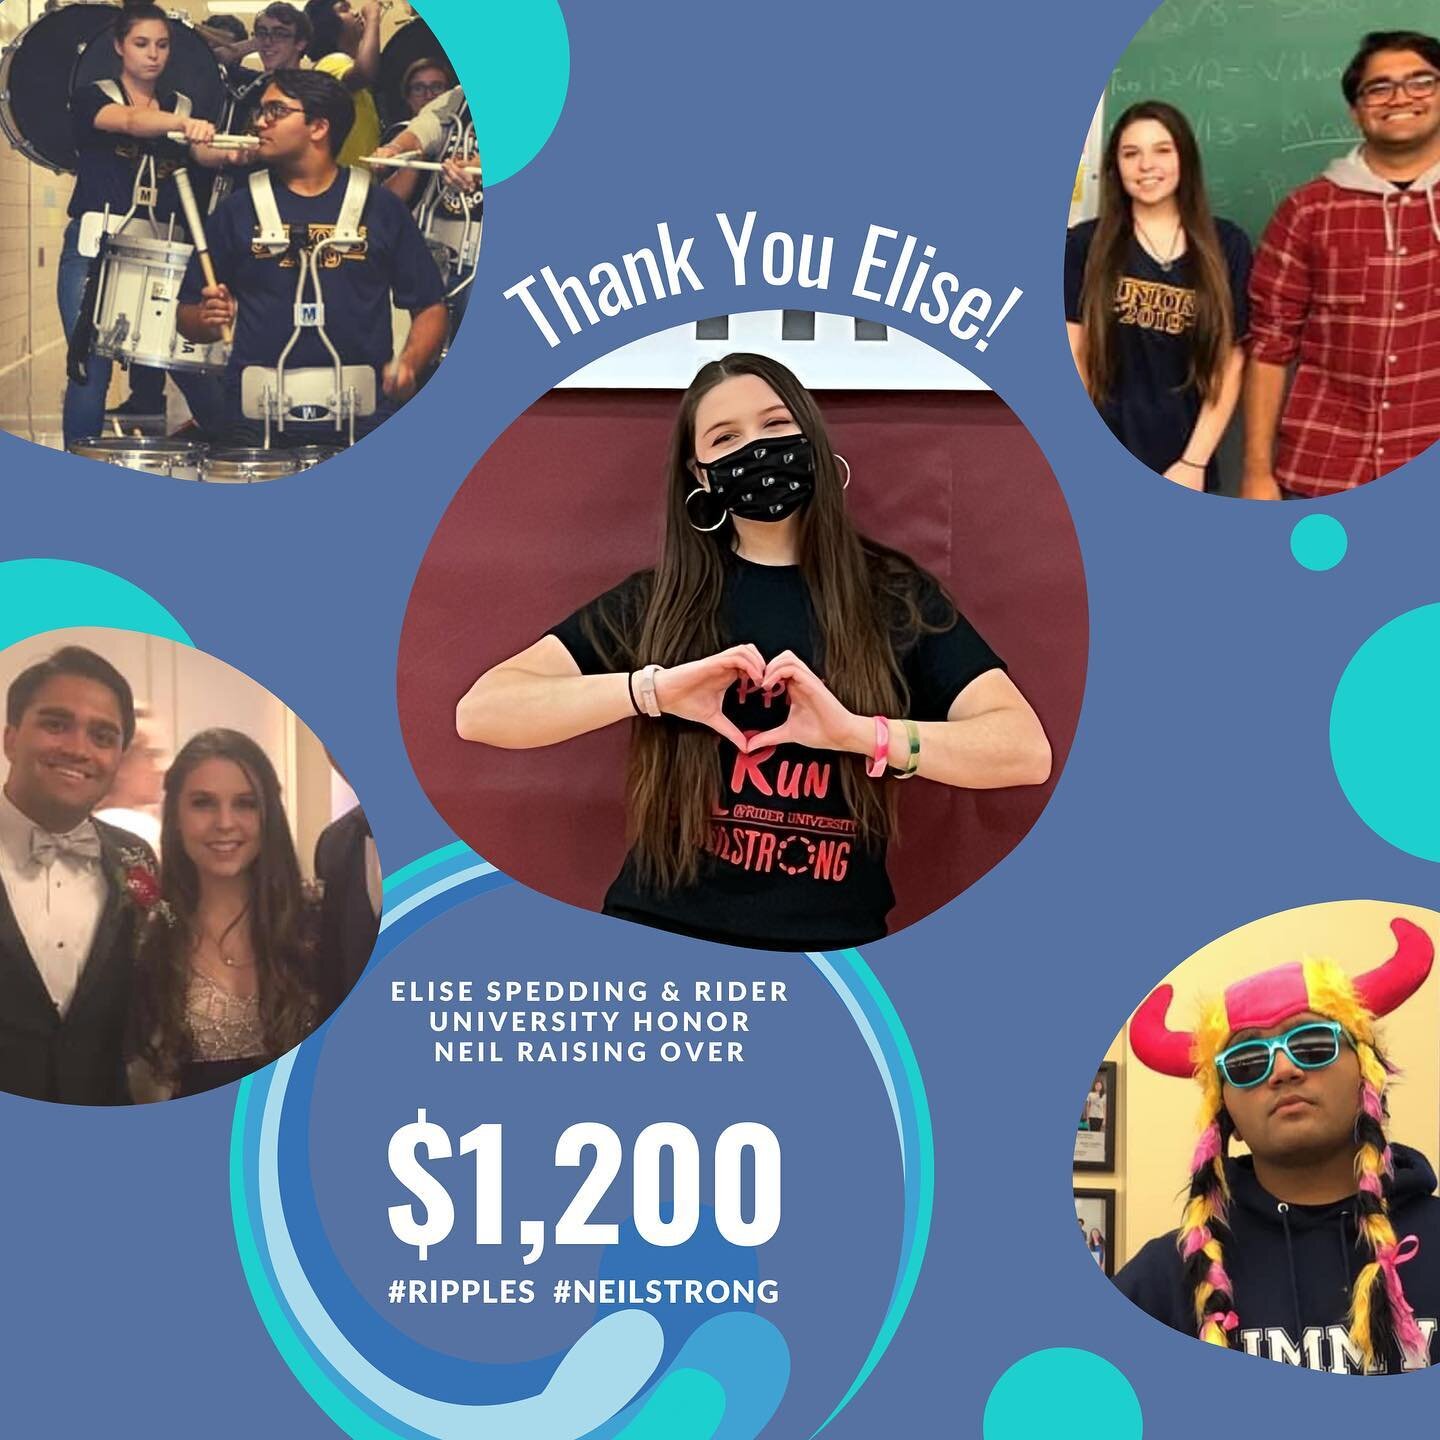 On Saturday December 4th, Neil&rsquo;s friend Elise Spedding created a ripple raising an amazing $1,200 dollars in honor of Neil, who she said during her speech was &ldquo;all about making change.&rdquo;

Elise posted tributes as Neil fought his batt